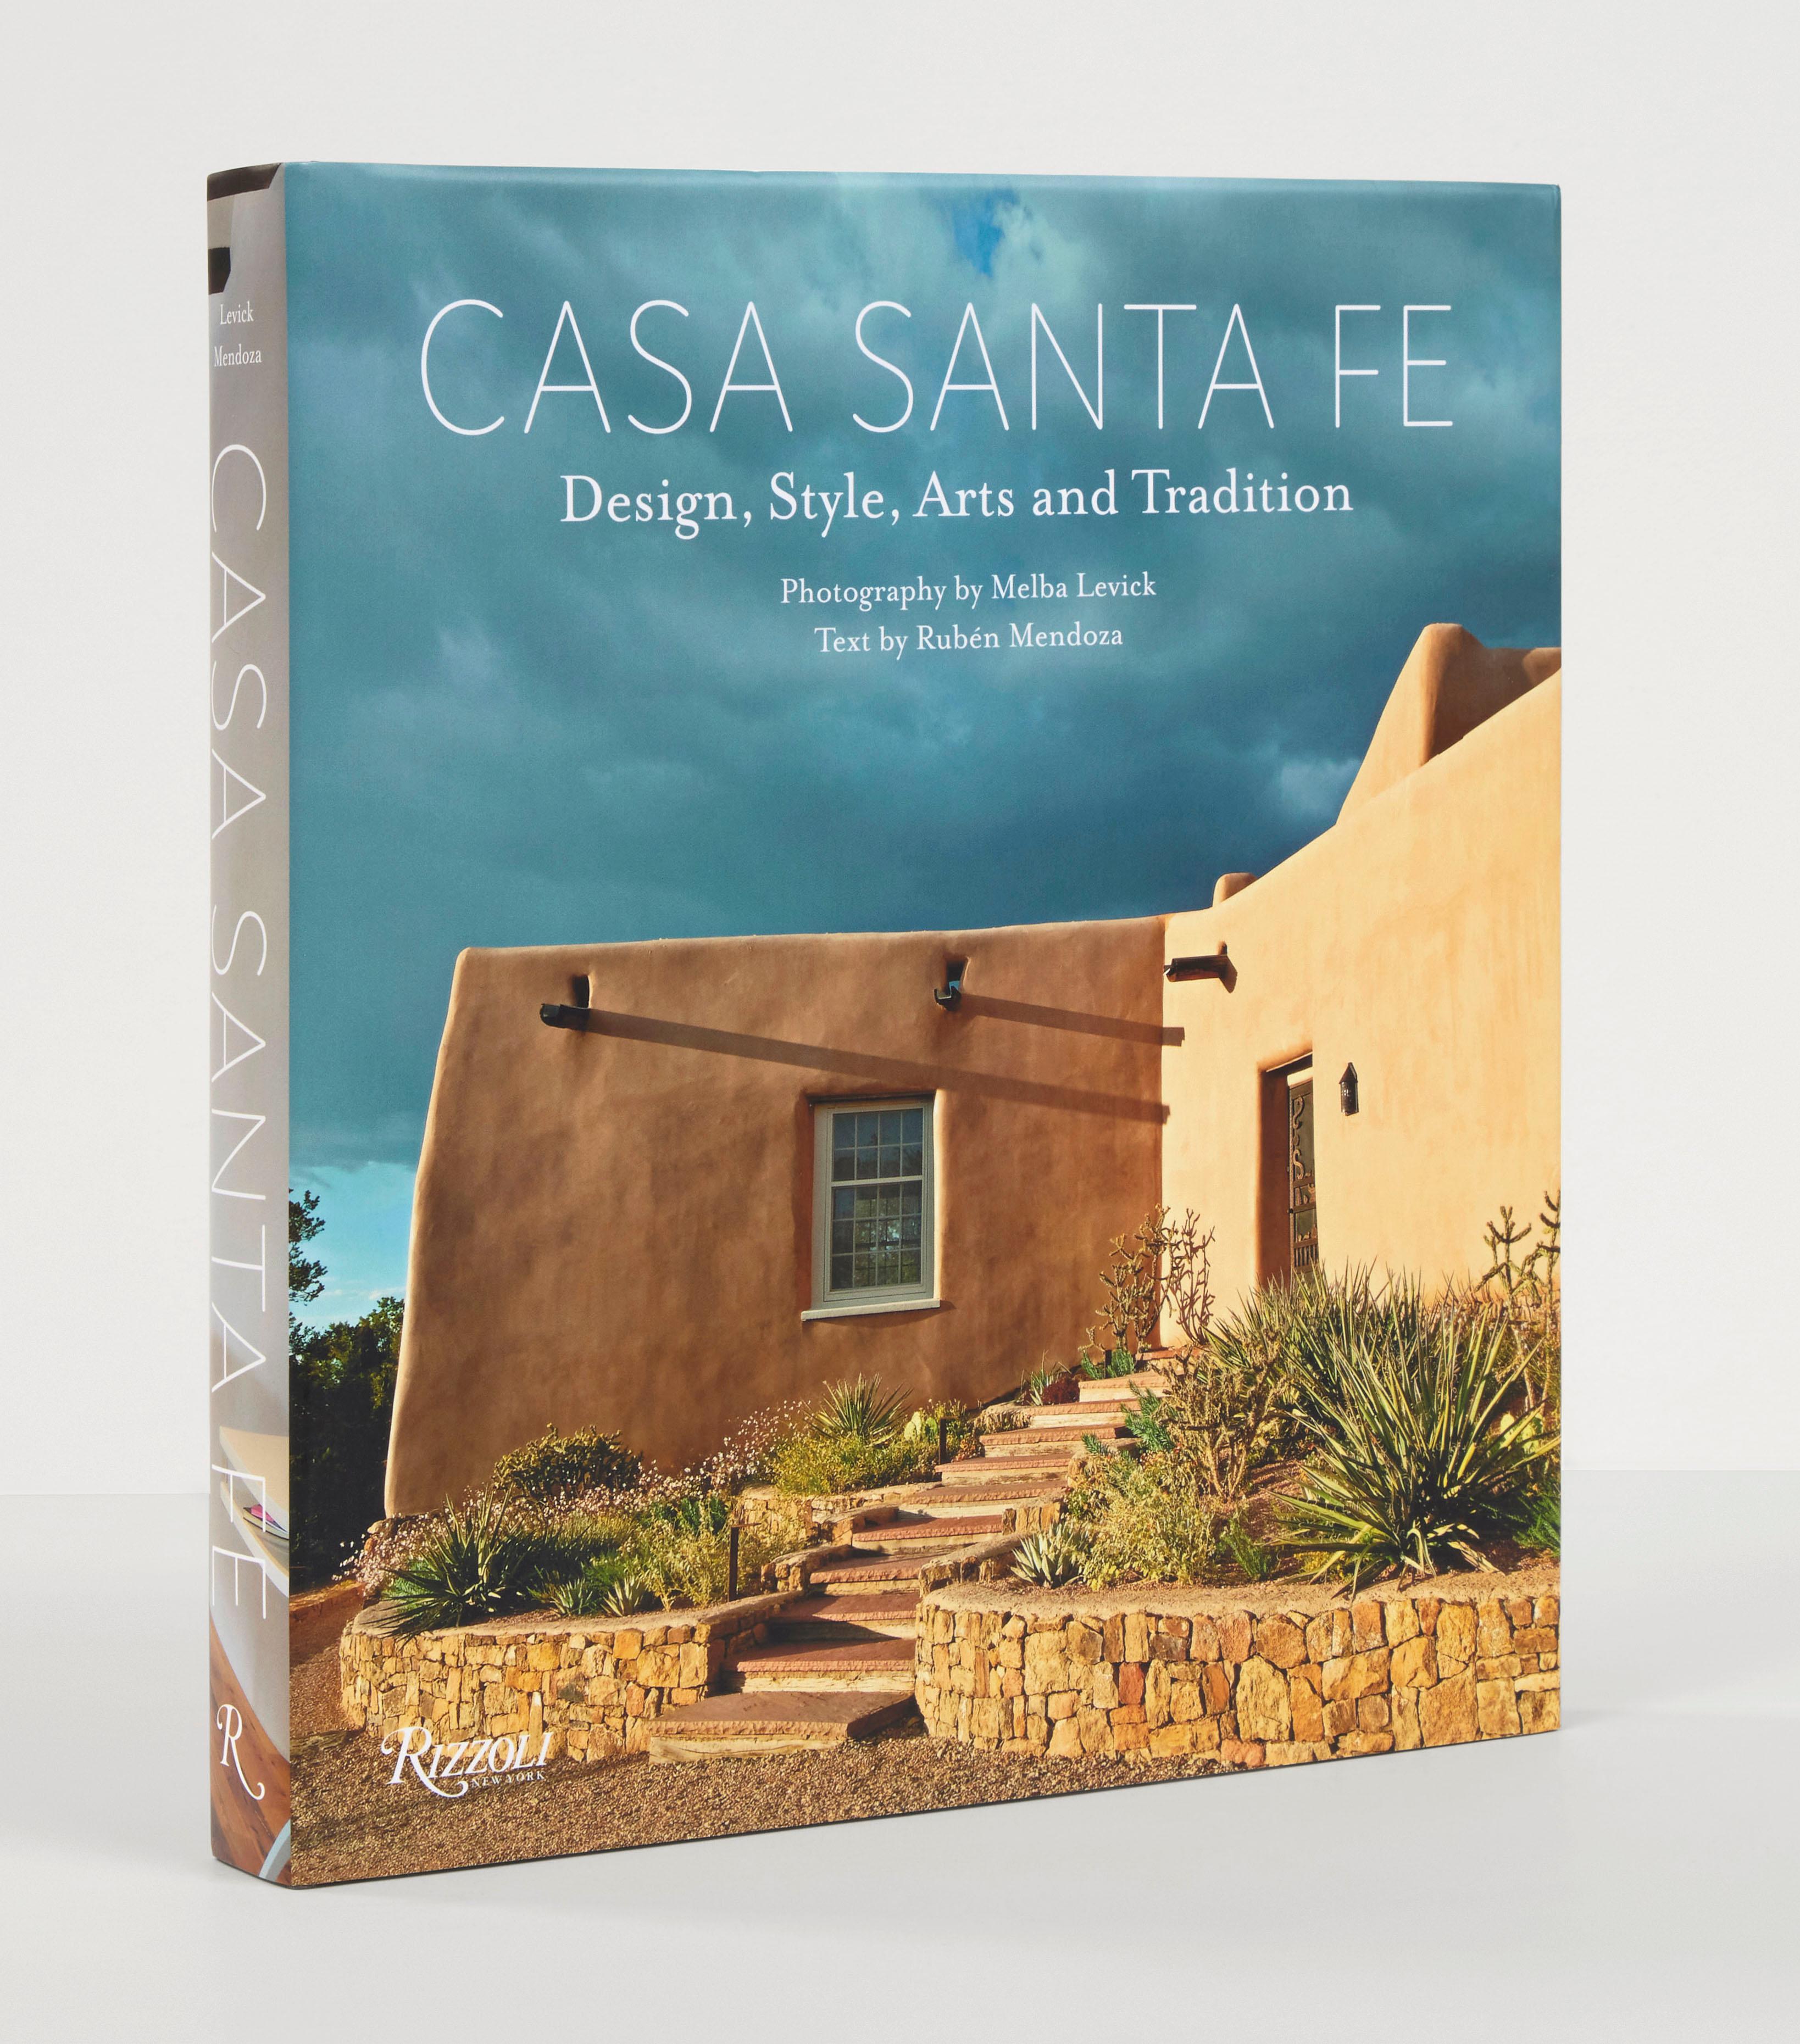 Casa Santa Fe: Design, Style, Arts, and Tradition
Photographs by Melba Levick, Text by Rubén G. Mendoza

Presented here are houses to dream of and dream in—a luminous celebration of the finest examples of the Santa Fe Style from the eighteenth